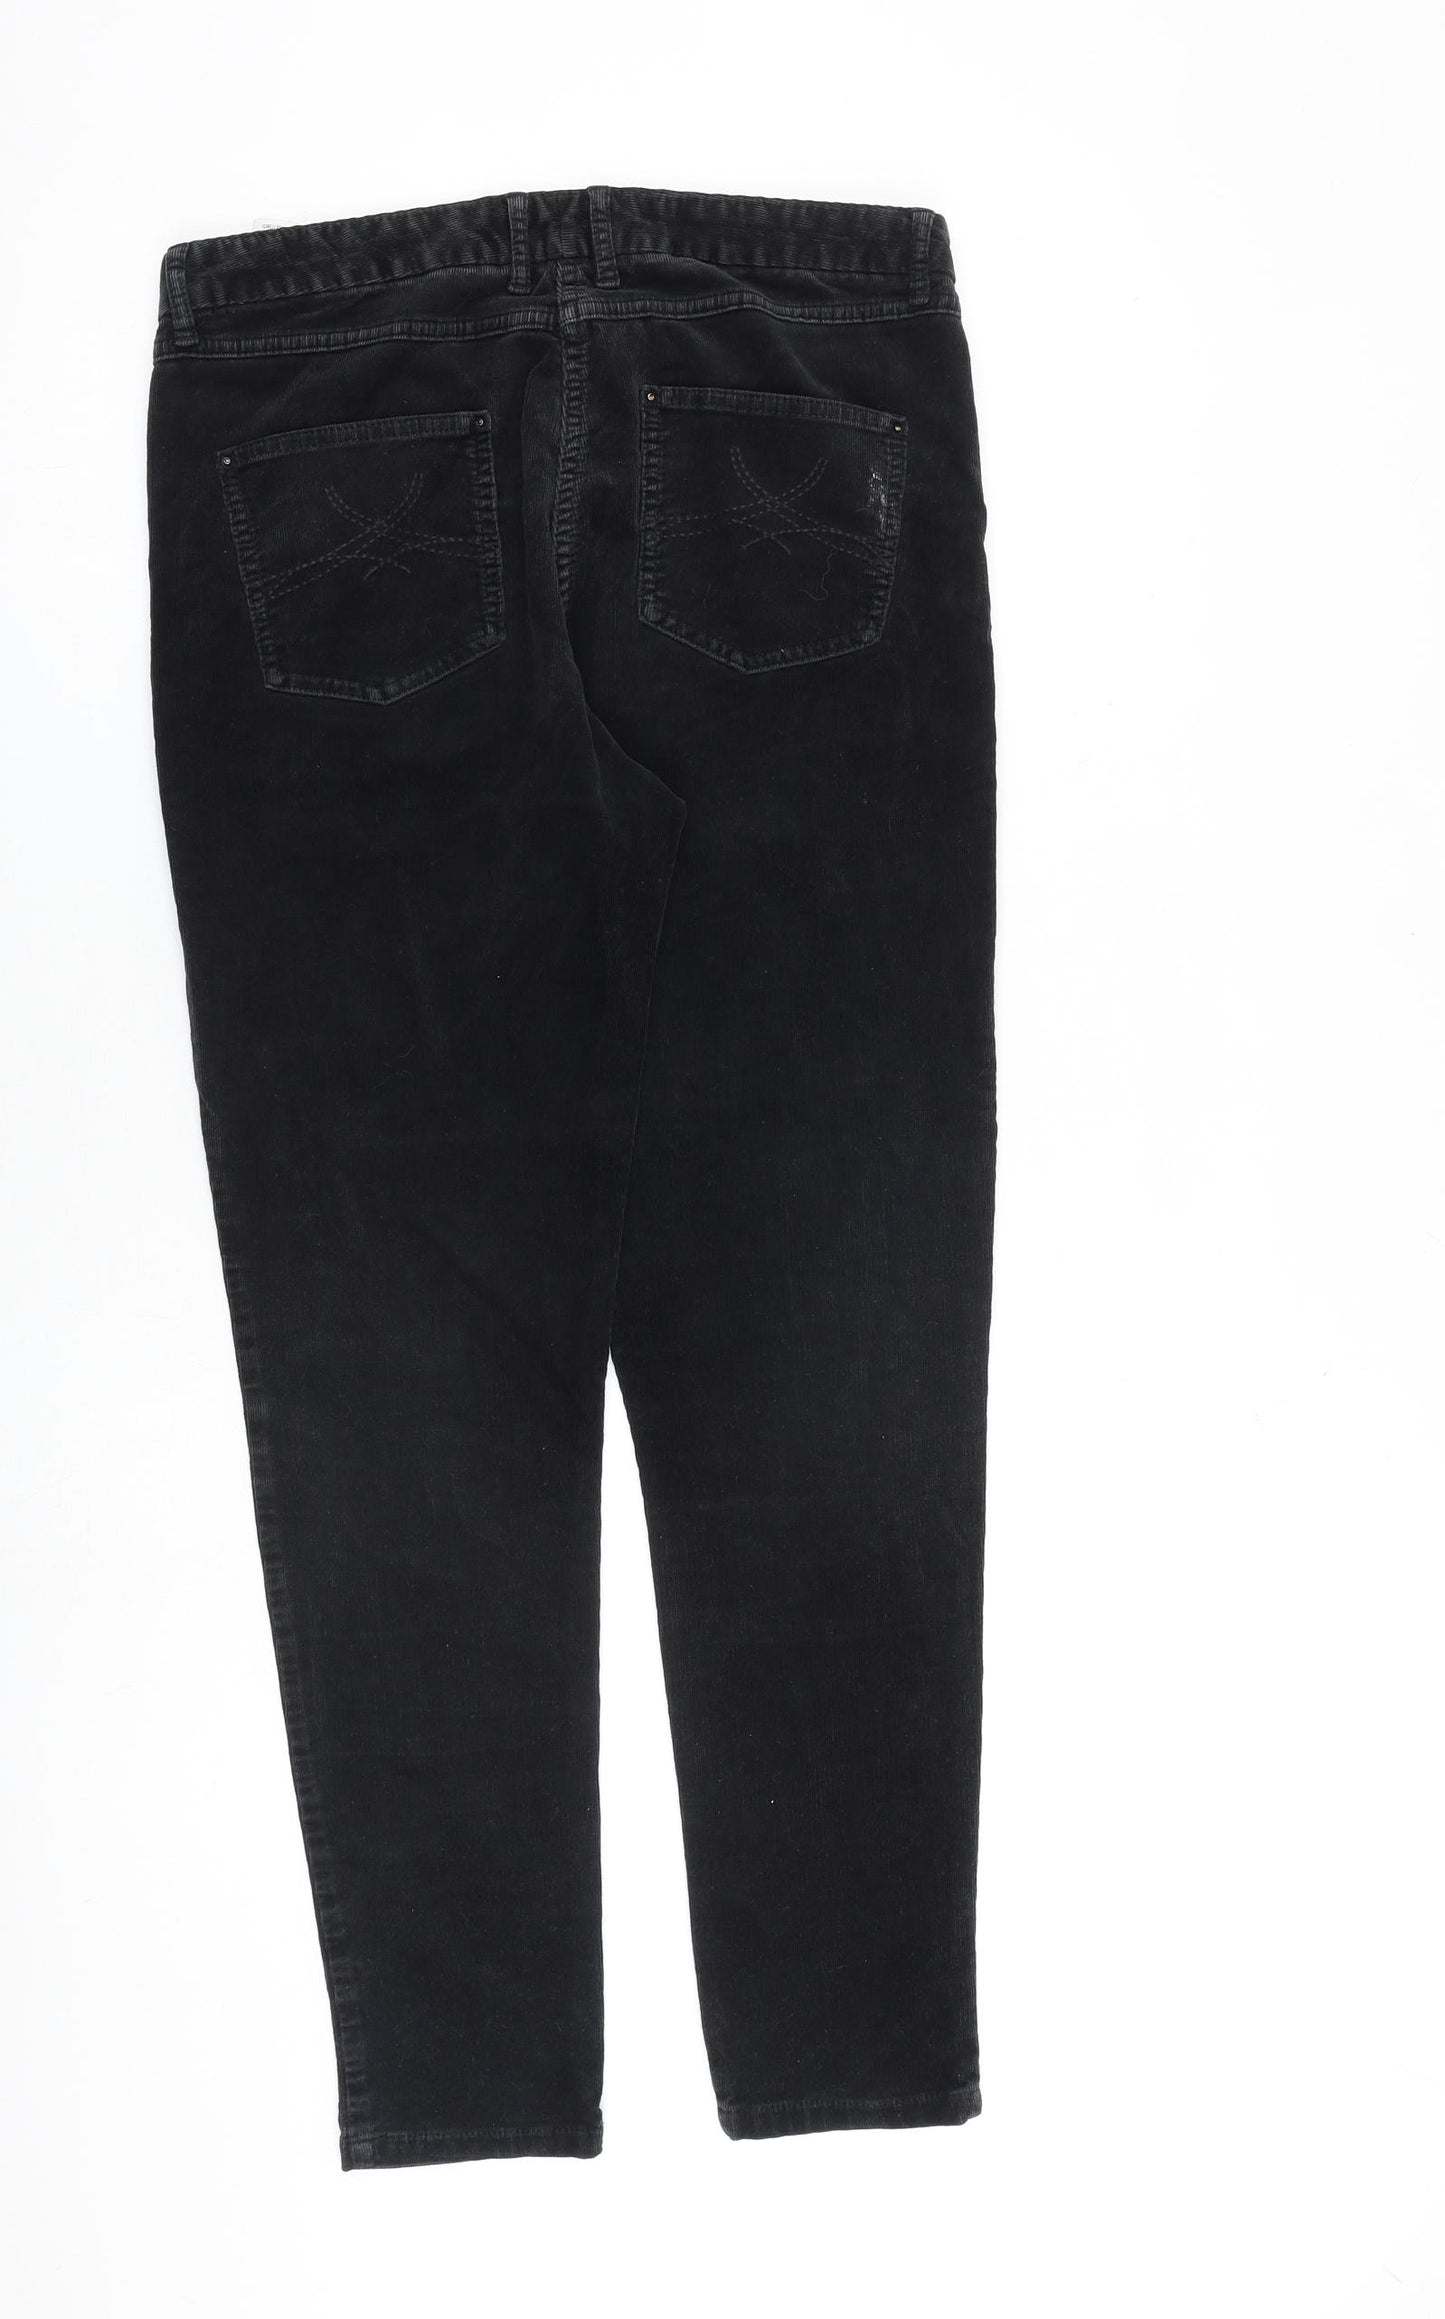 Marks and Spencer Womens Black Cotton Trousers Size 12 L30 in Regular Zip